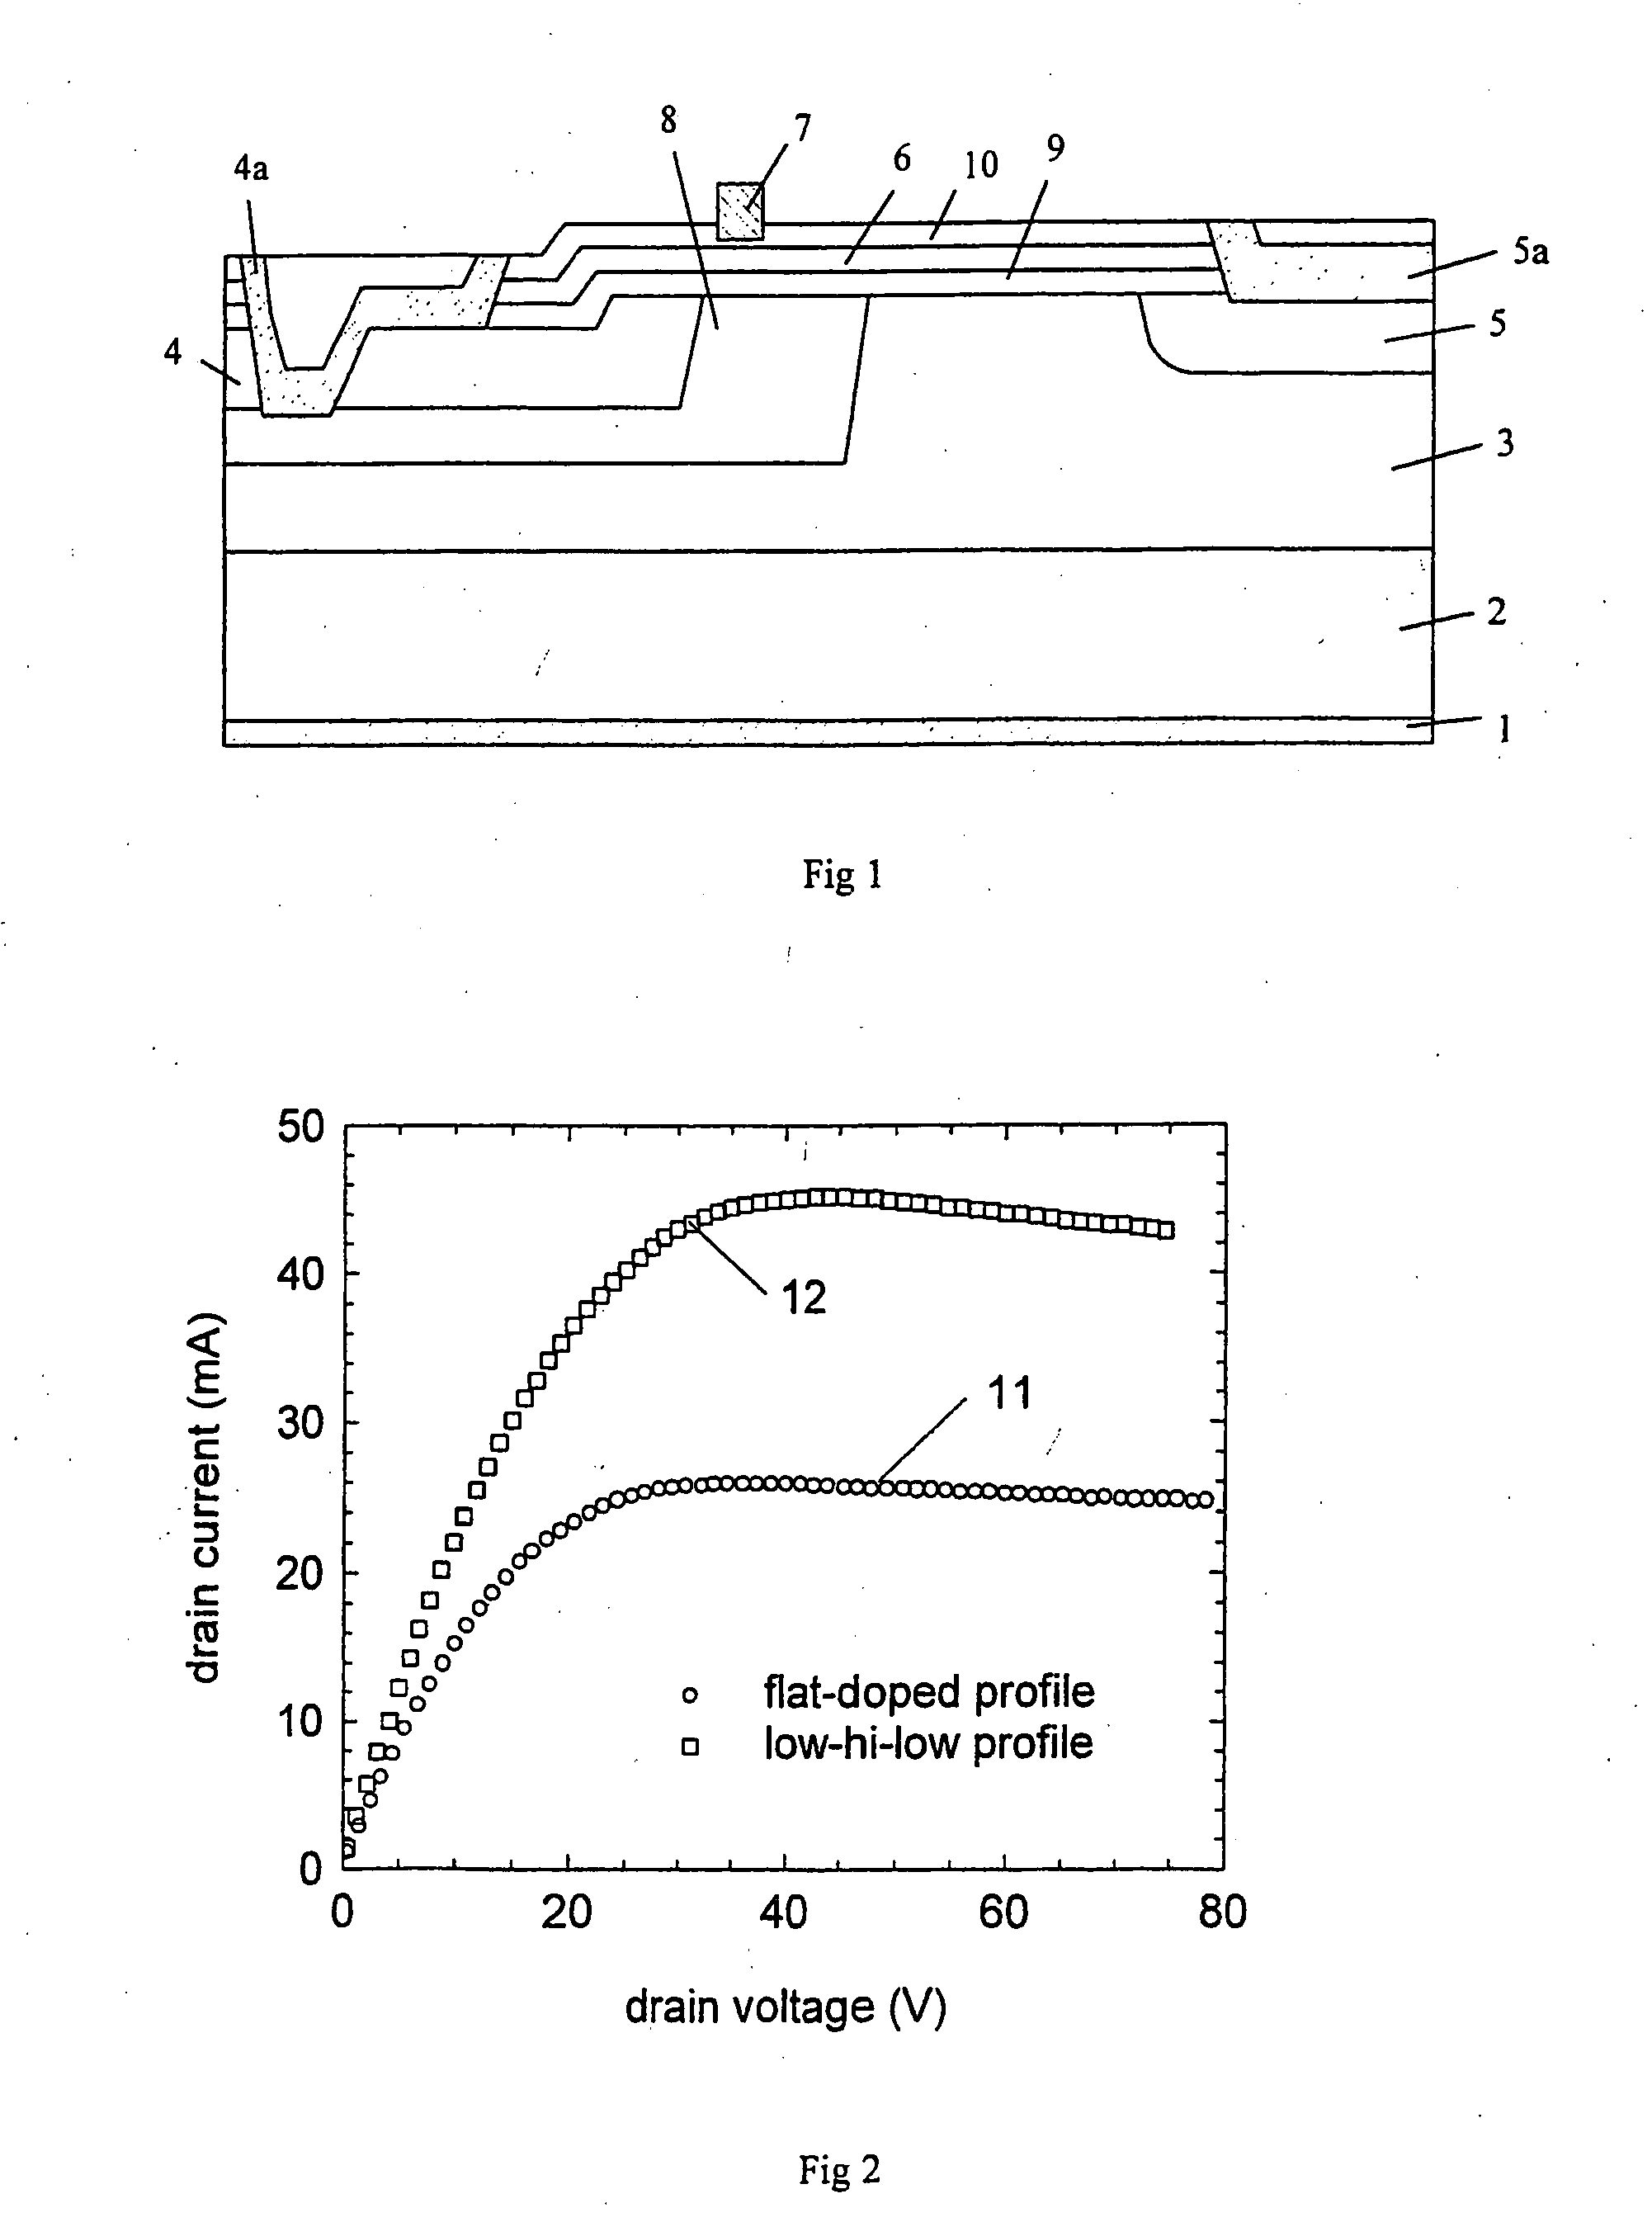 Lateral Field Effect Transistor and Its Fabrication Comprising a Spacer Layer Above and Below the Channel Layer